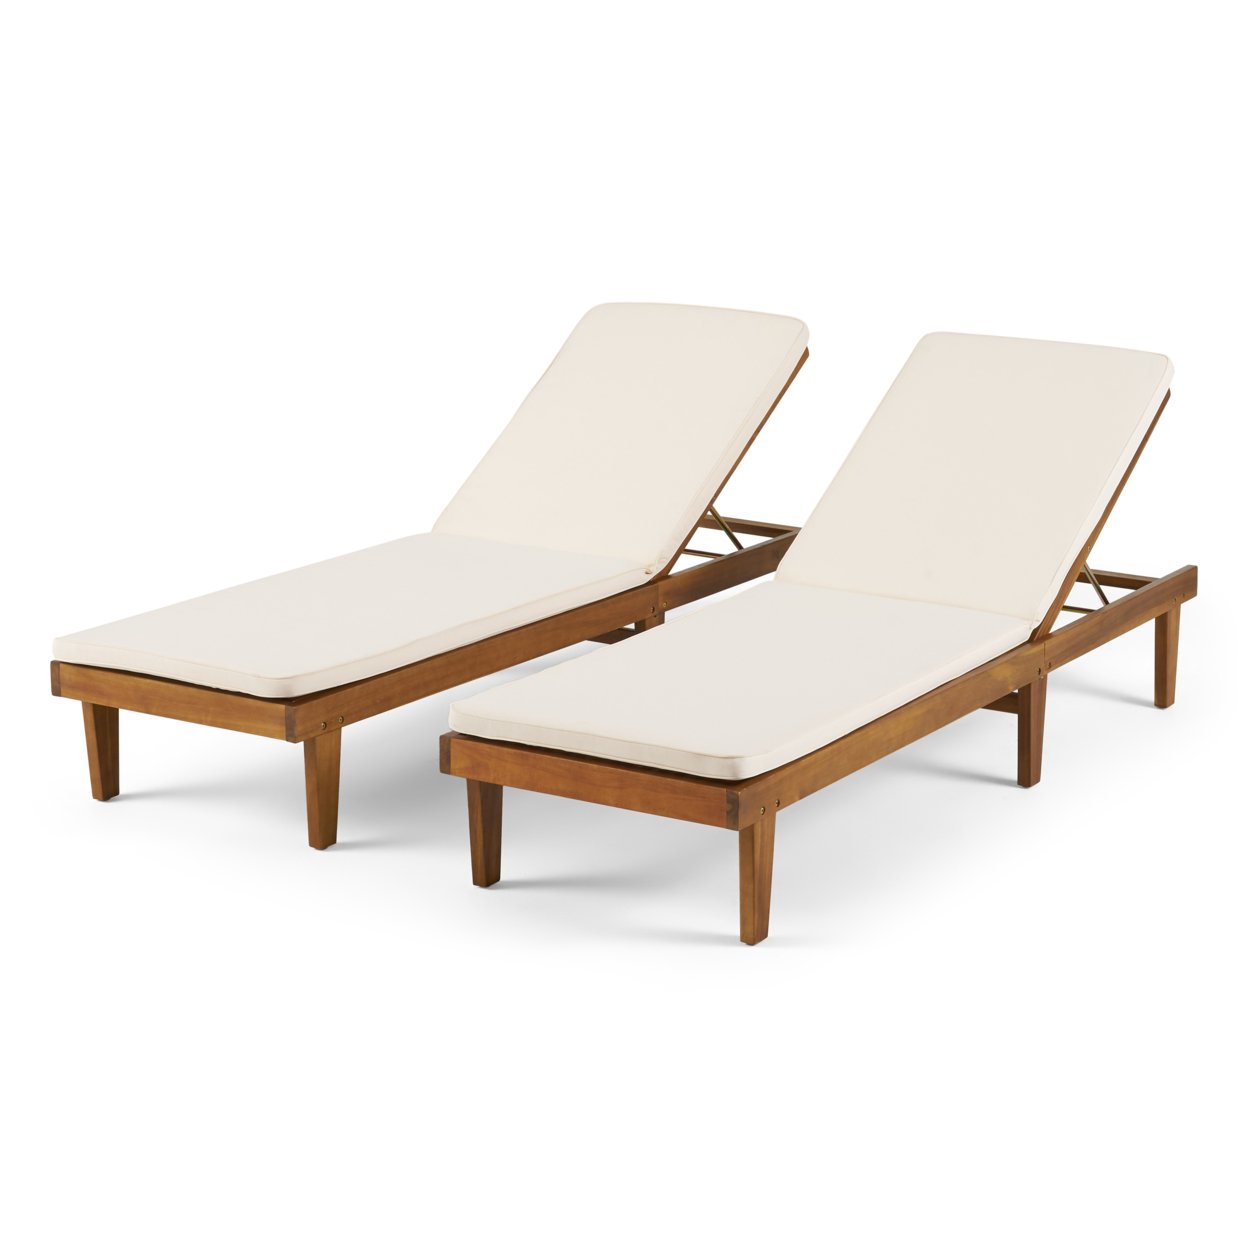 Madge Oudoor Modern Acacia Wood Chaise Lounge With Cushion (Set Of 2) - Gray Finish + Cream